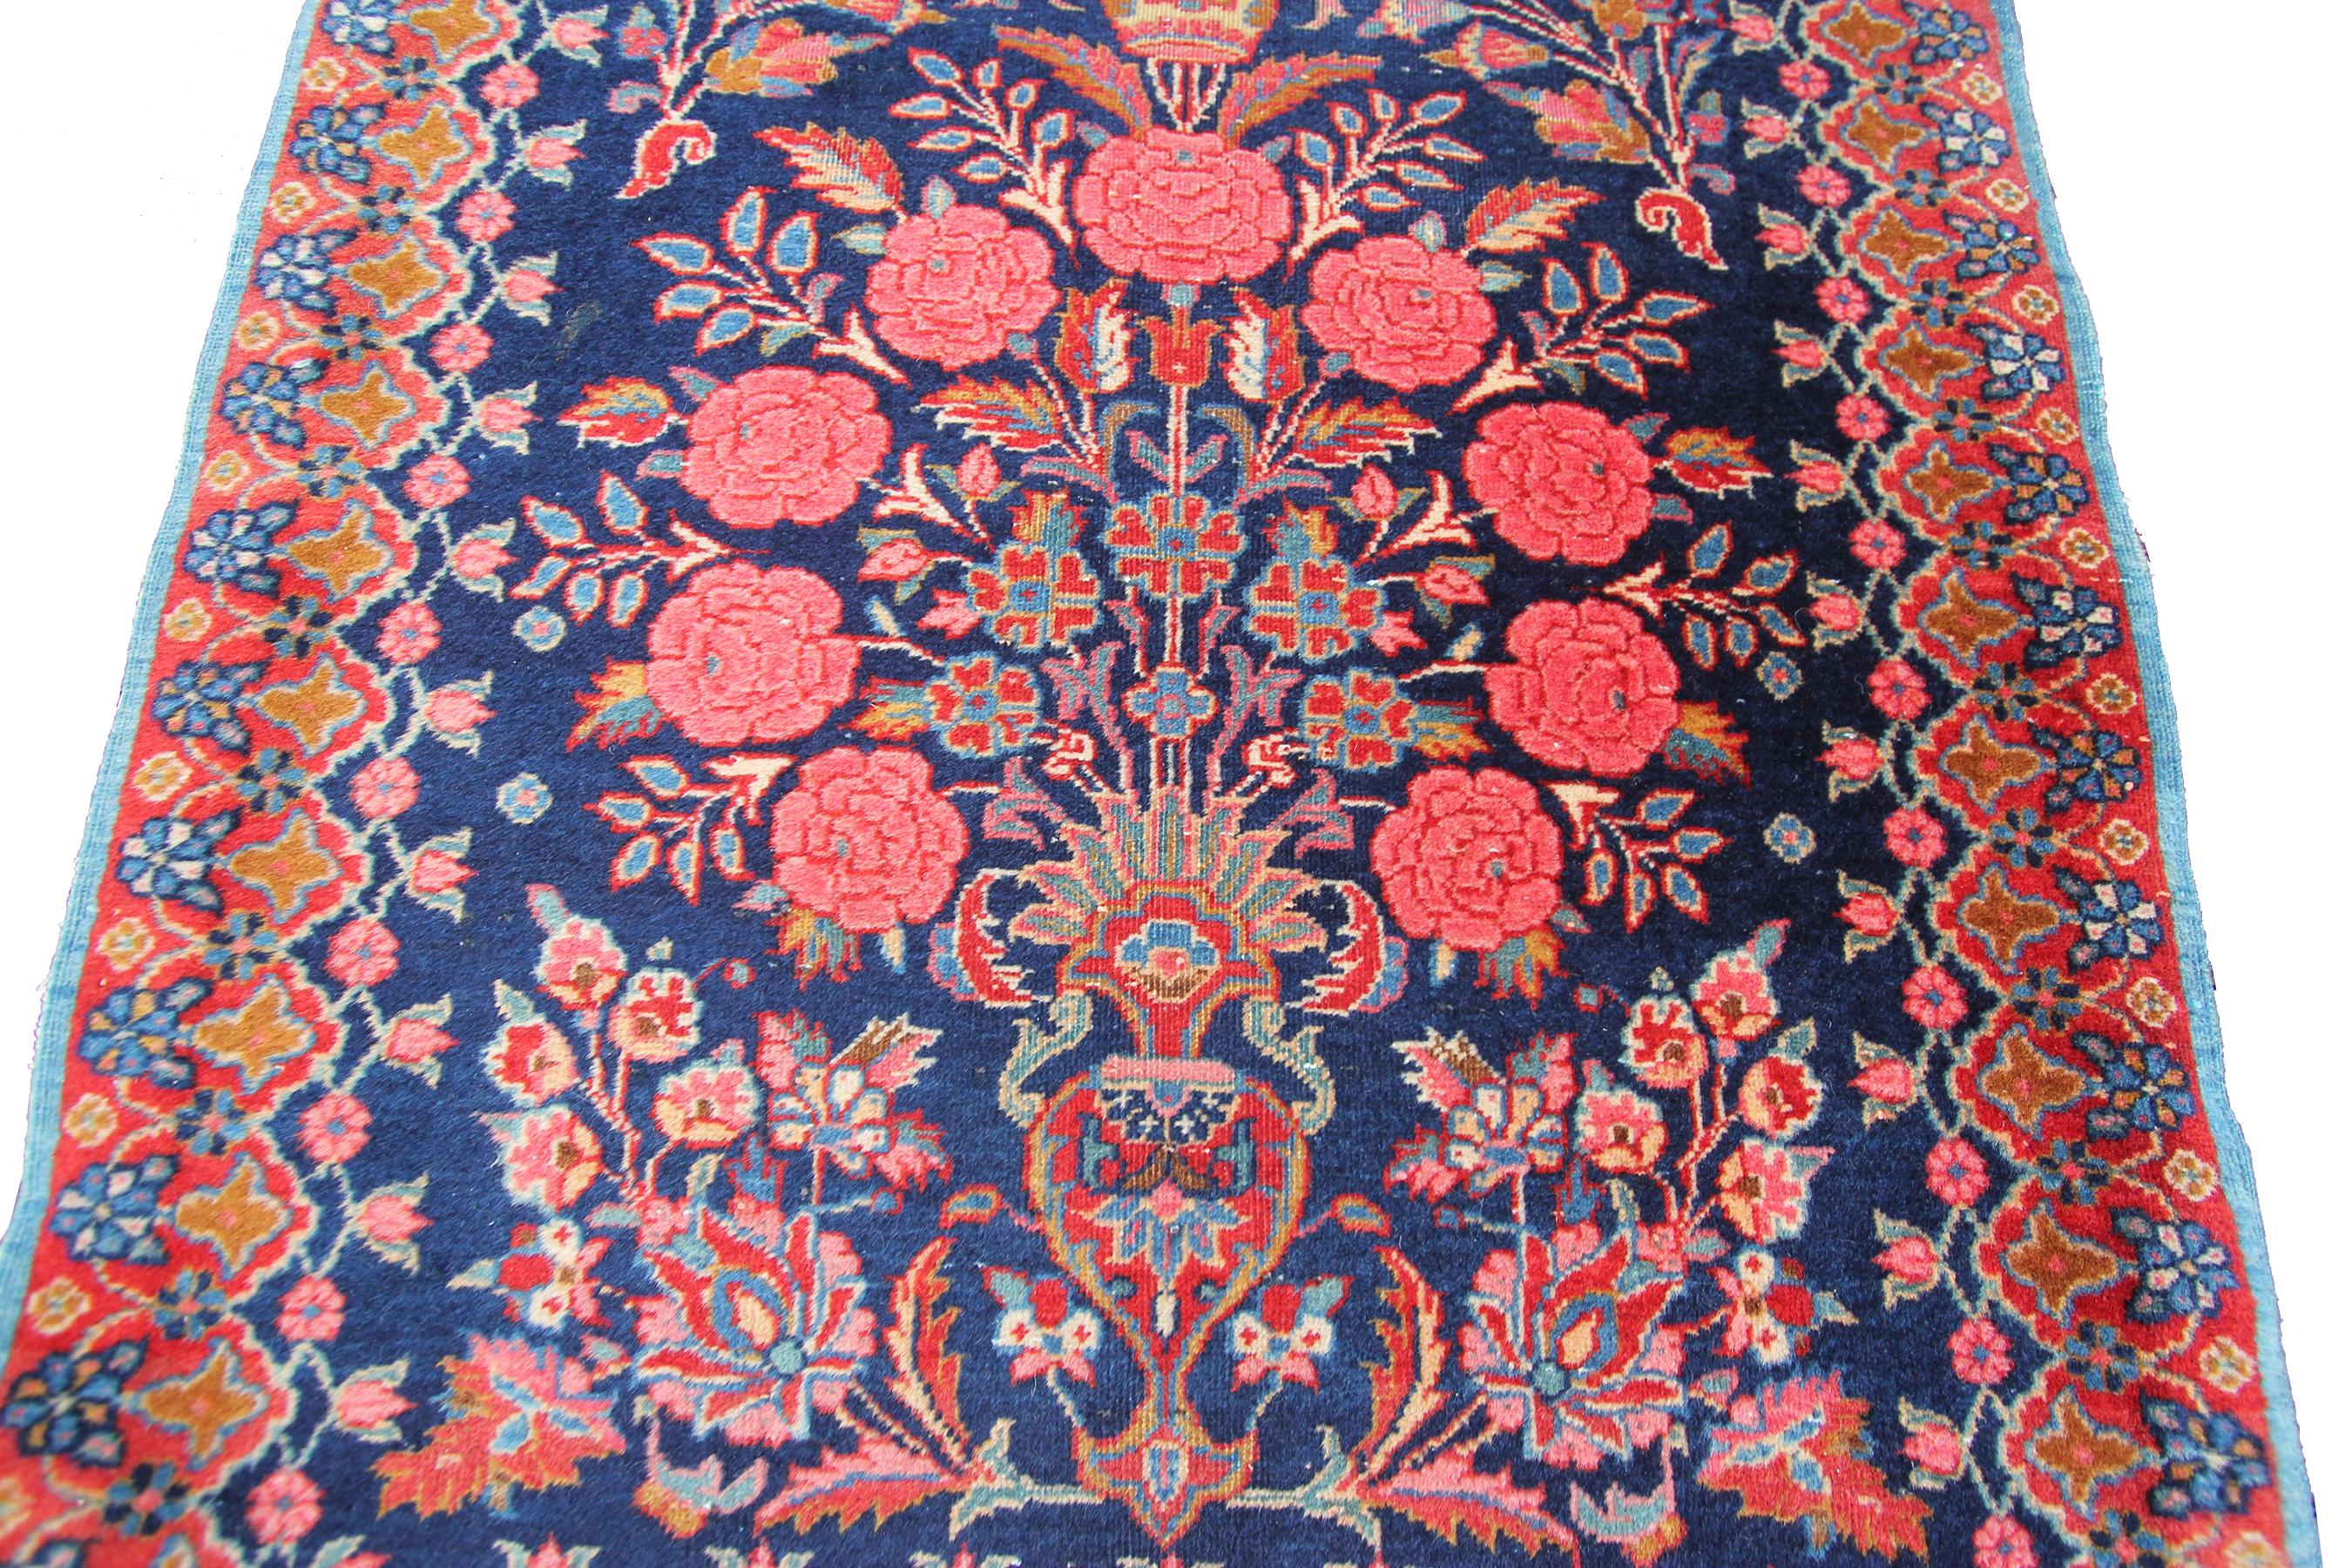 Hand-Knotted Antique Manchester Kashan Rug Antique Persian Kashan Rug 1890 66x92cm 2x3 For Sale